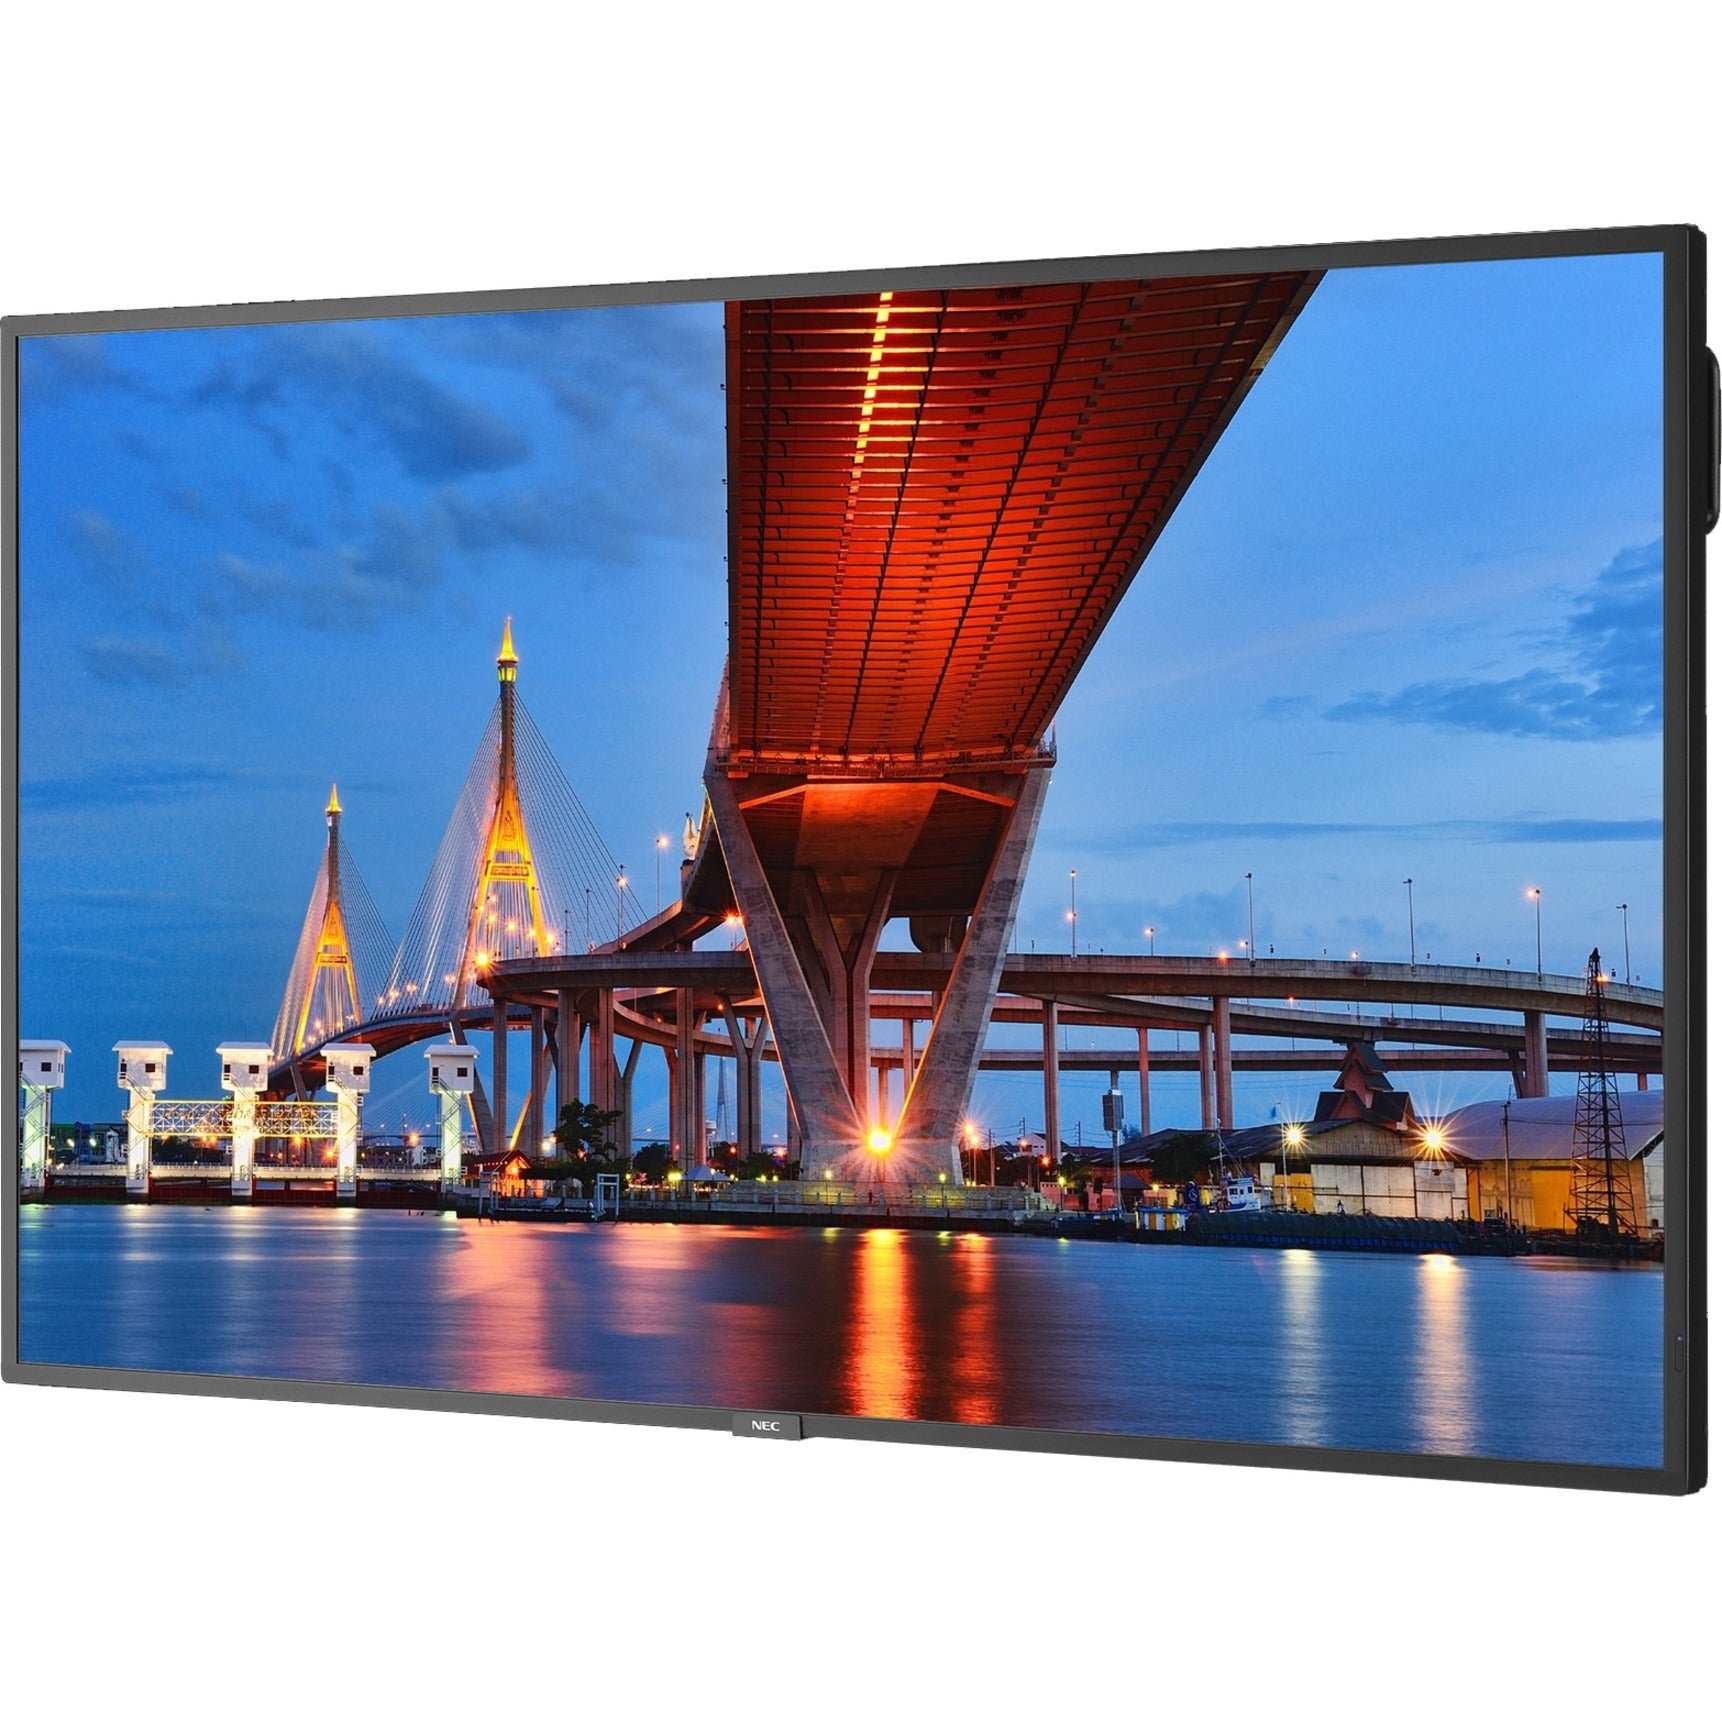 NEC Display ME651-AVT3 65" Ultra High Definition Commercial Display with Integrated ATSC/NTSC Tuner, 400 Nit, 8-bit+FRC, 2160p, 3 Year Warranty, Energy Star, HDMI x2, DP x1 [Discontinued]